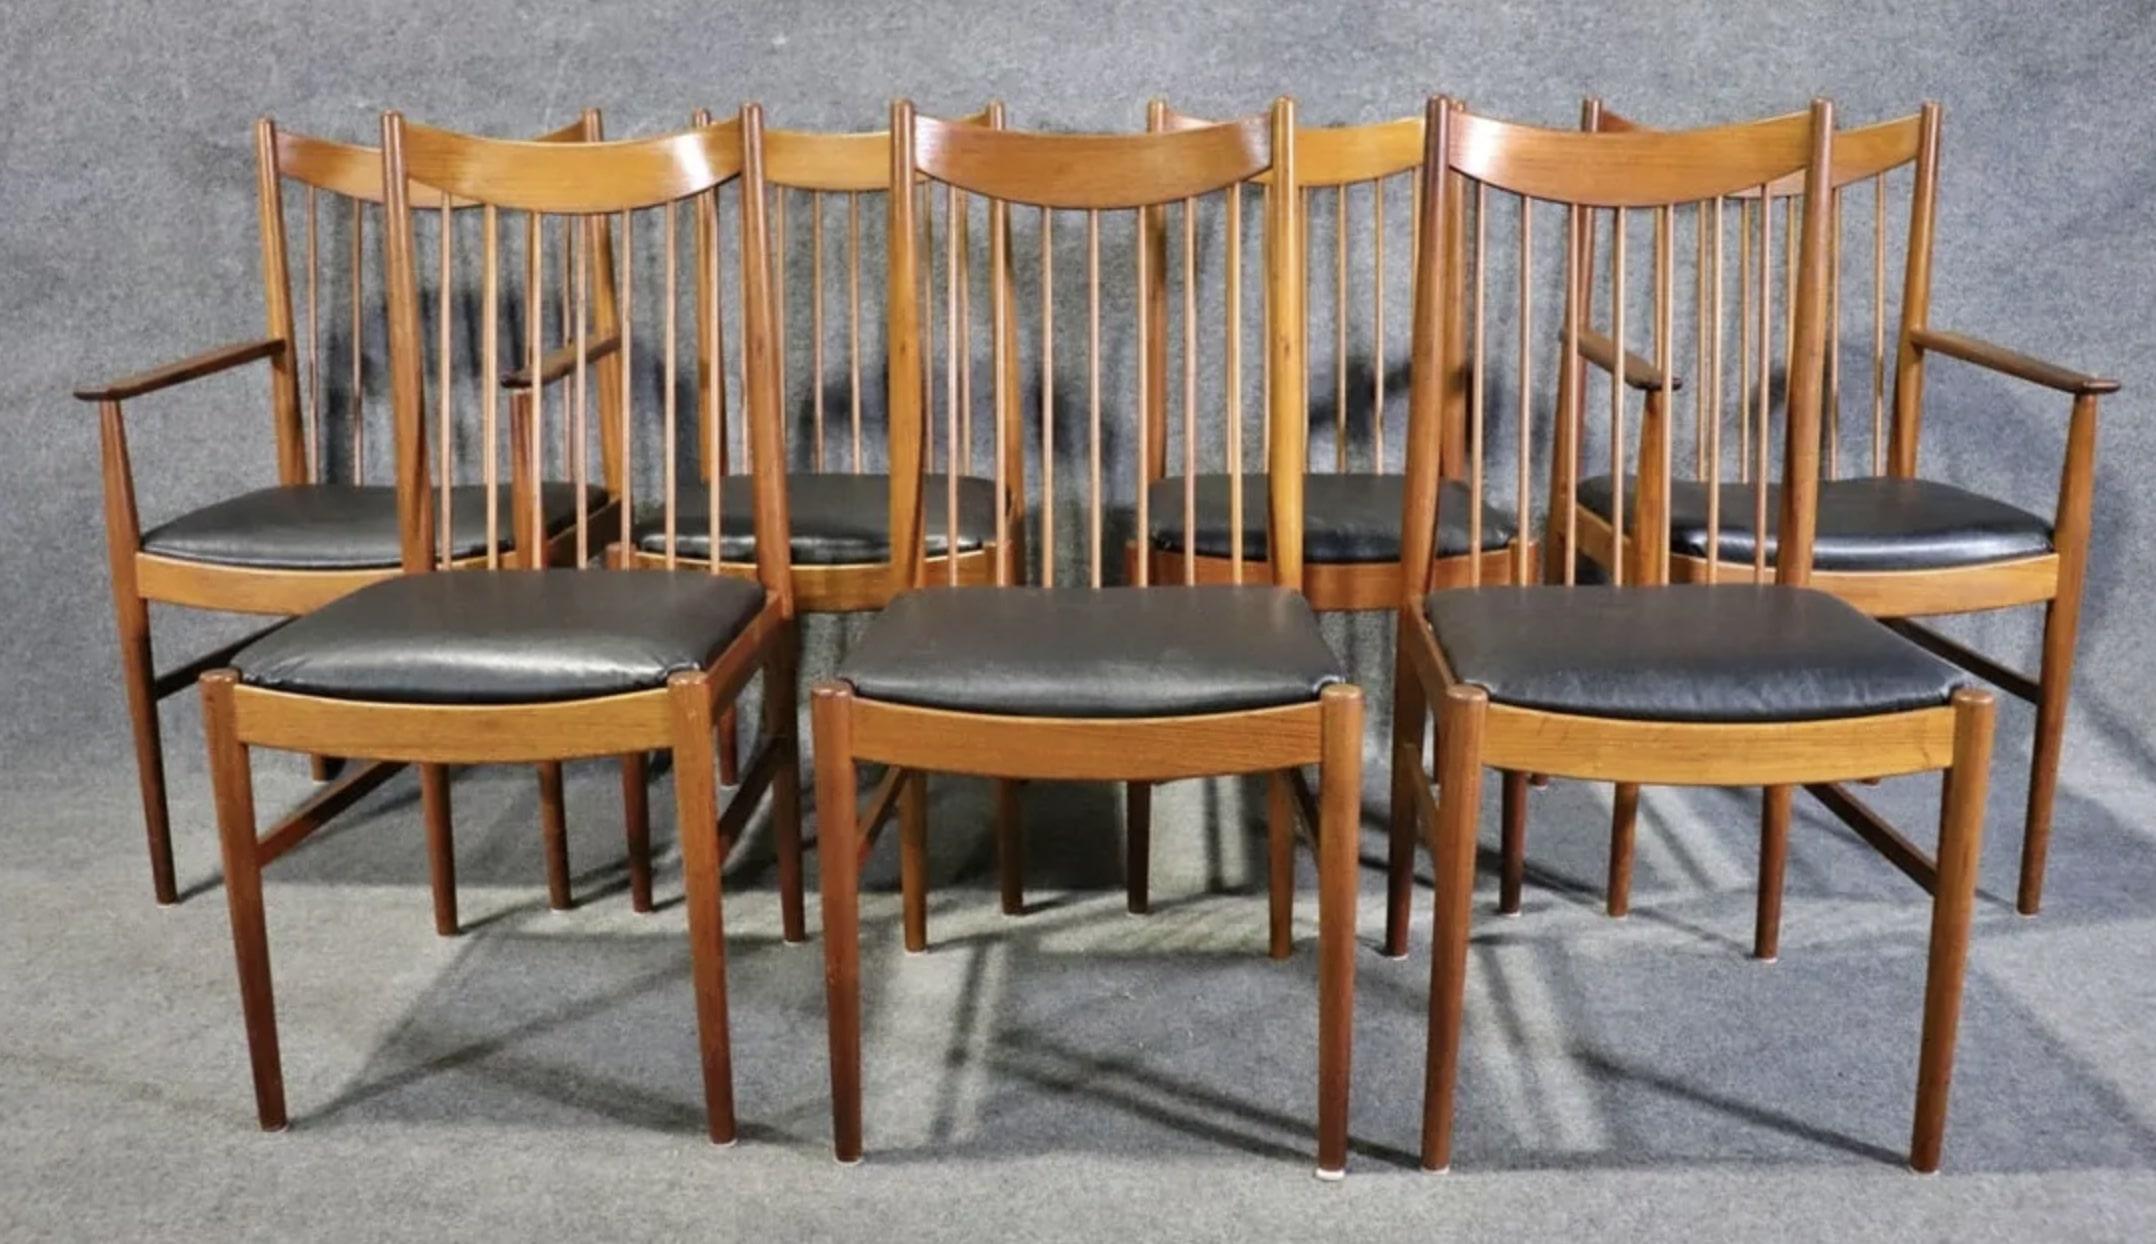 Set of 8 model 422 dining chairs designed by Helge Sibast. Long spindle backs with rounded head rests. Two throne chairs, six side chairs.
Armchairs: 38 5/8